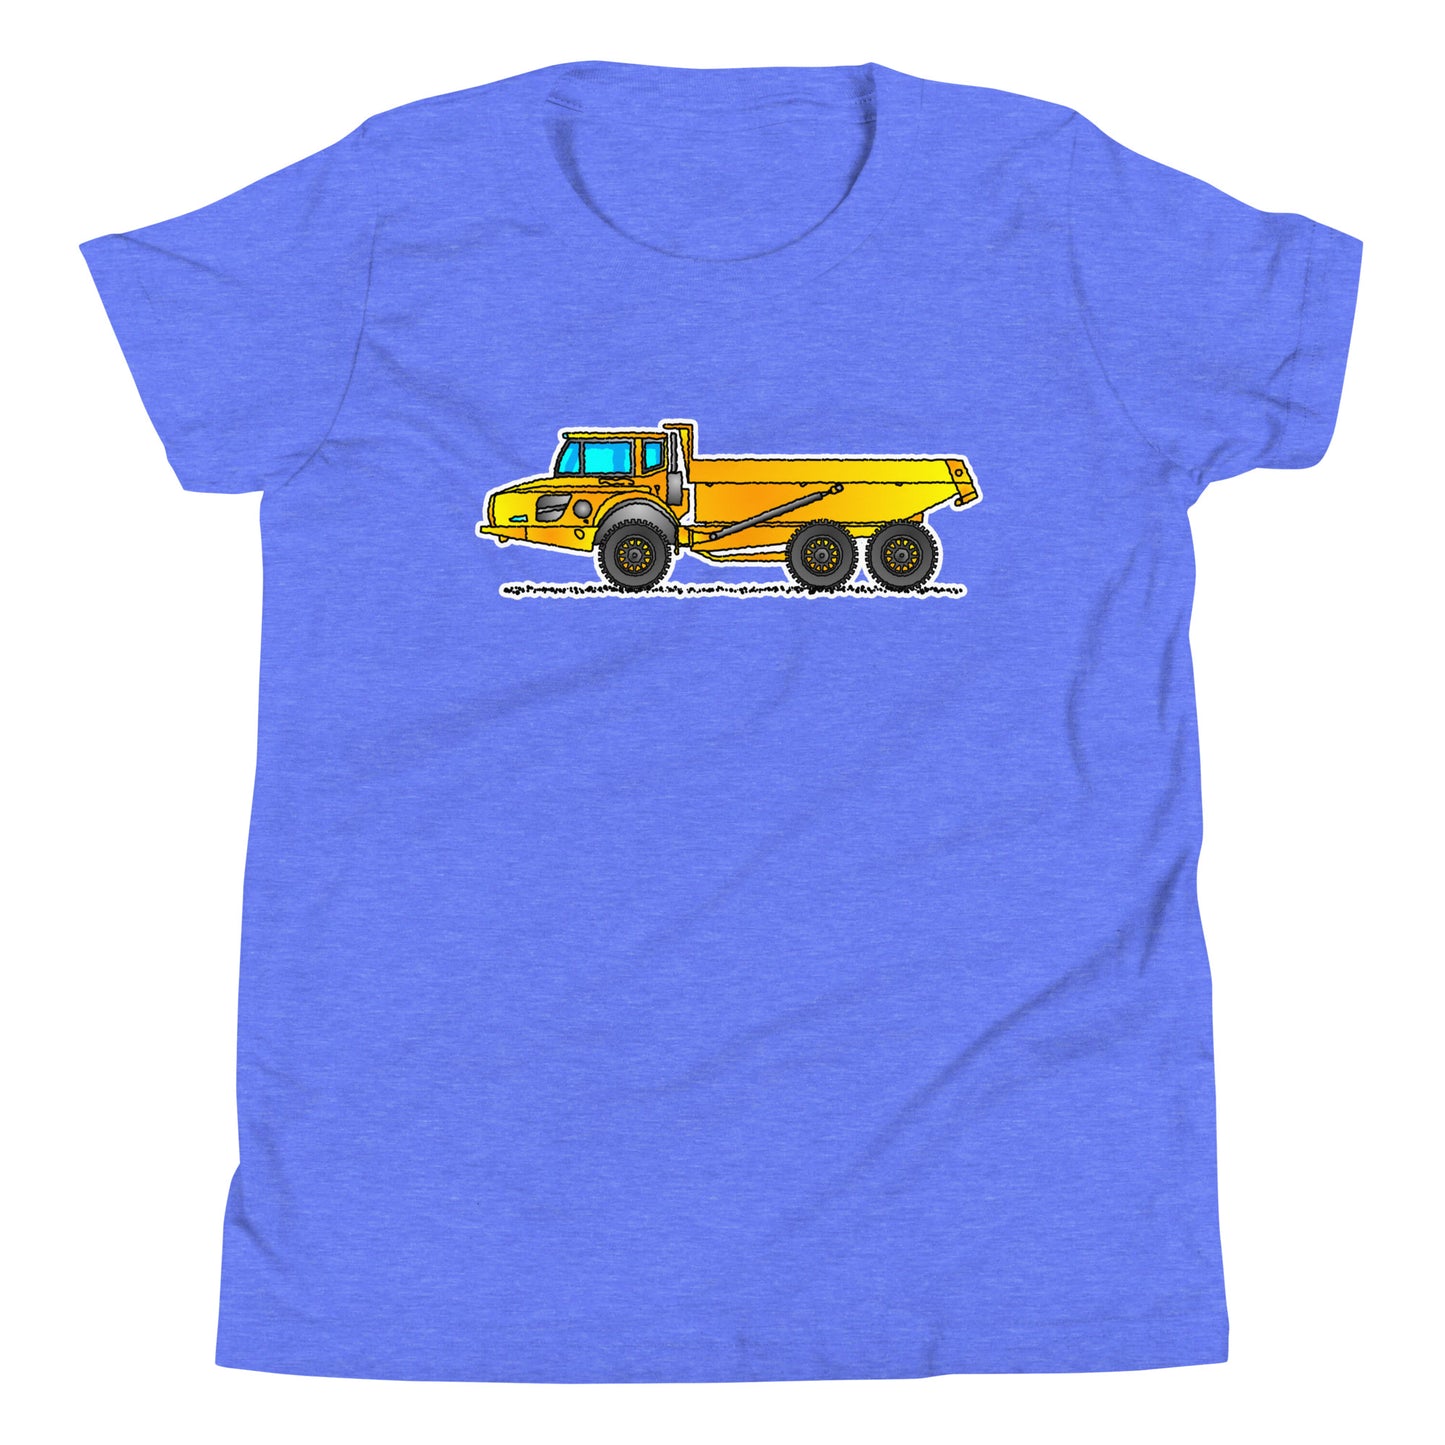 Articulated Hauler T-Shirt, Youth